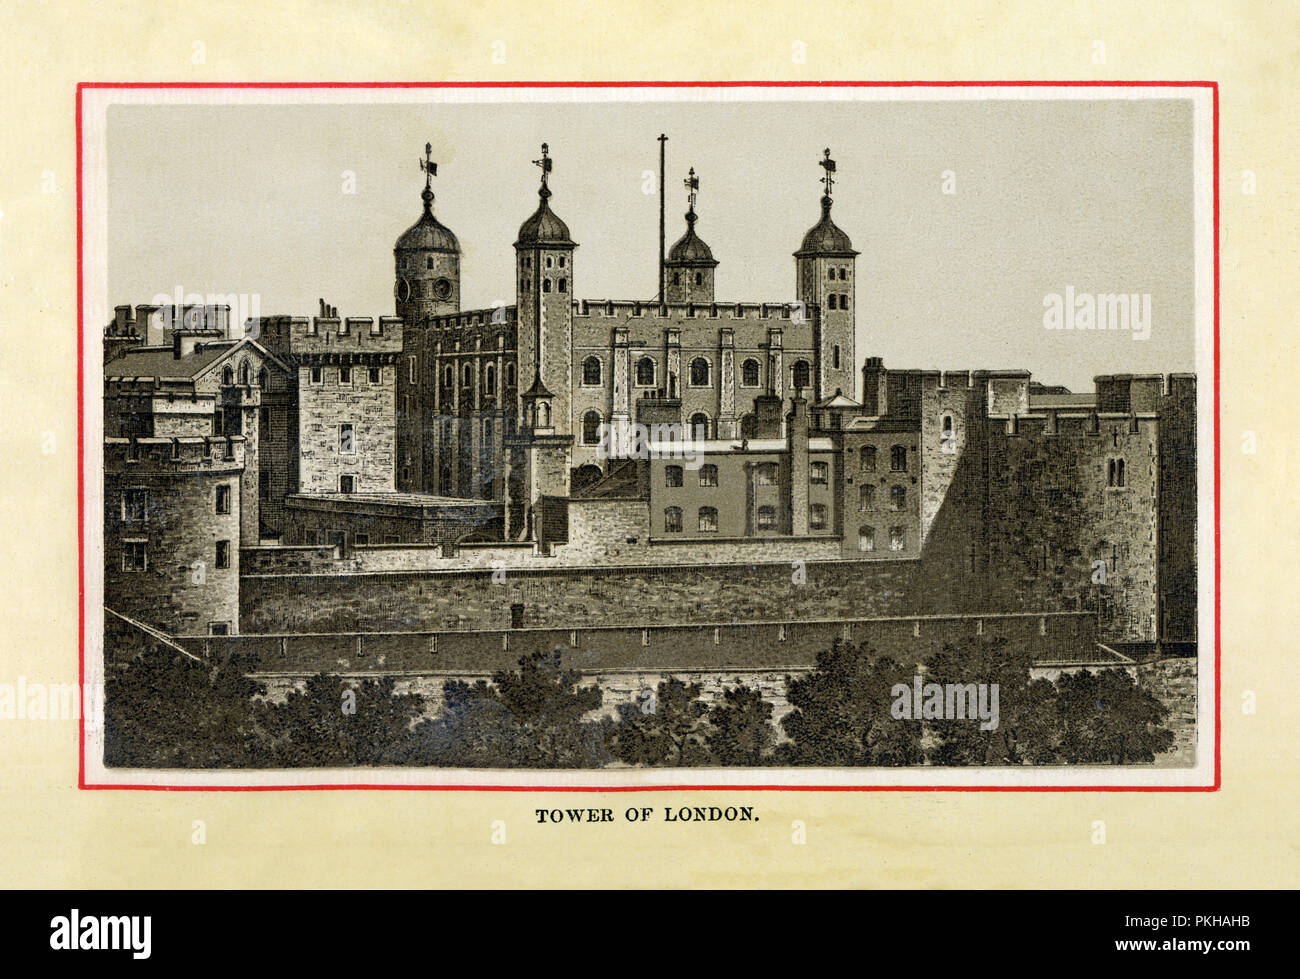 The Tower of London, 1880 high quality steel engraving of the castle whose central keep, the White Tower, was built by William the Conqueror after his successful invasion of England in 1066 Stock Photo